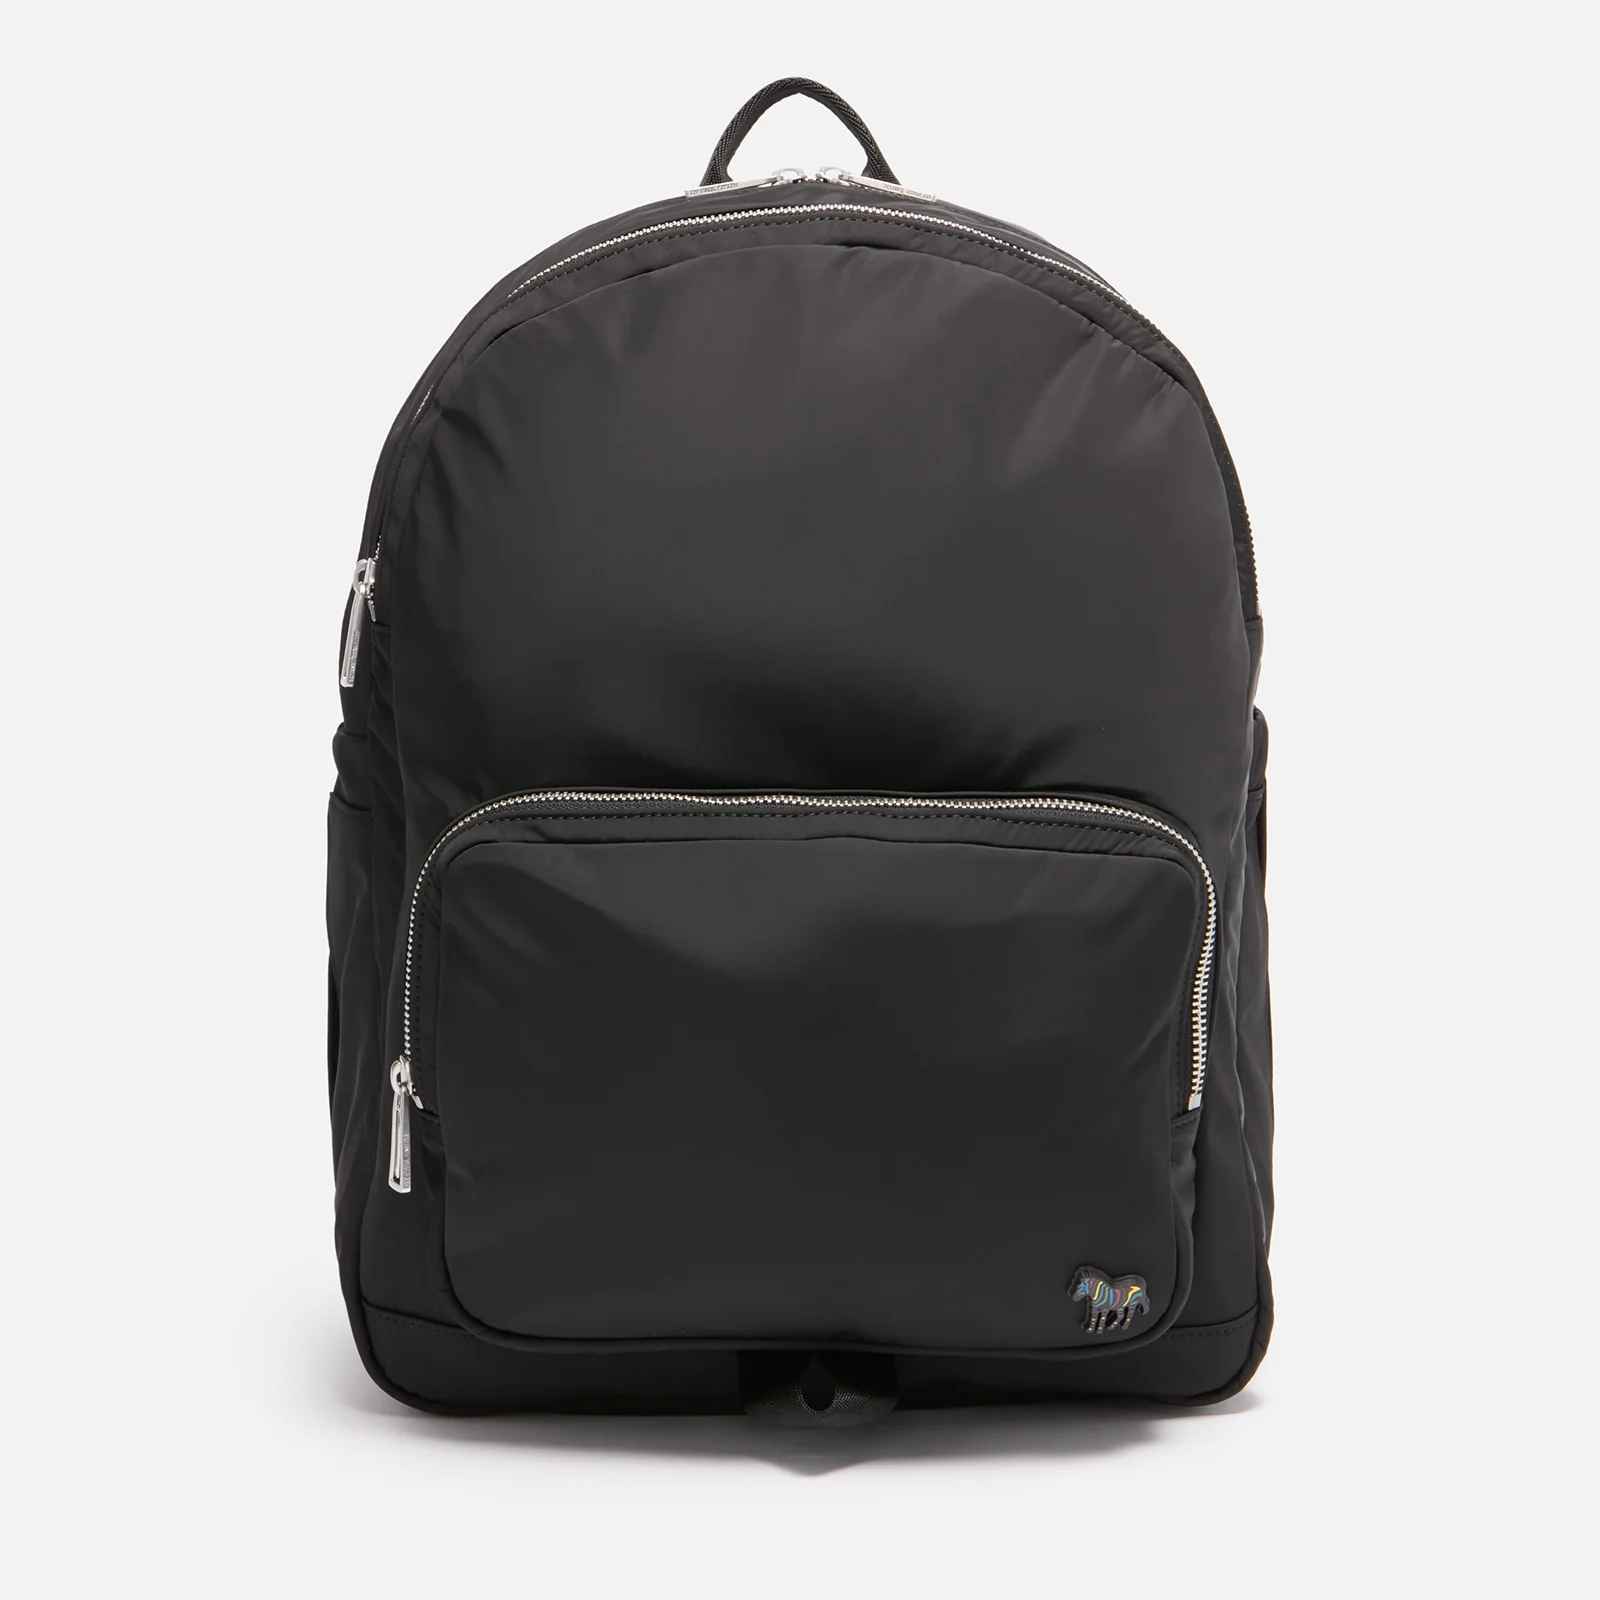 PS Paul Smith Shell Backpack Image 1